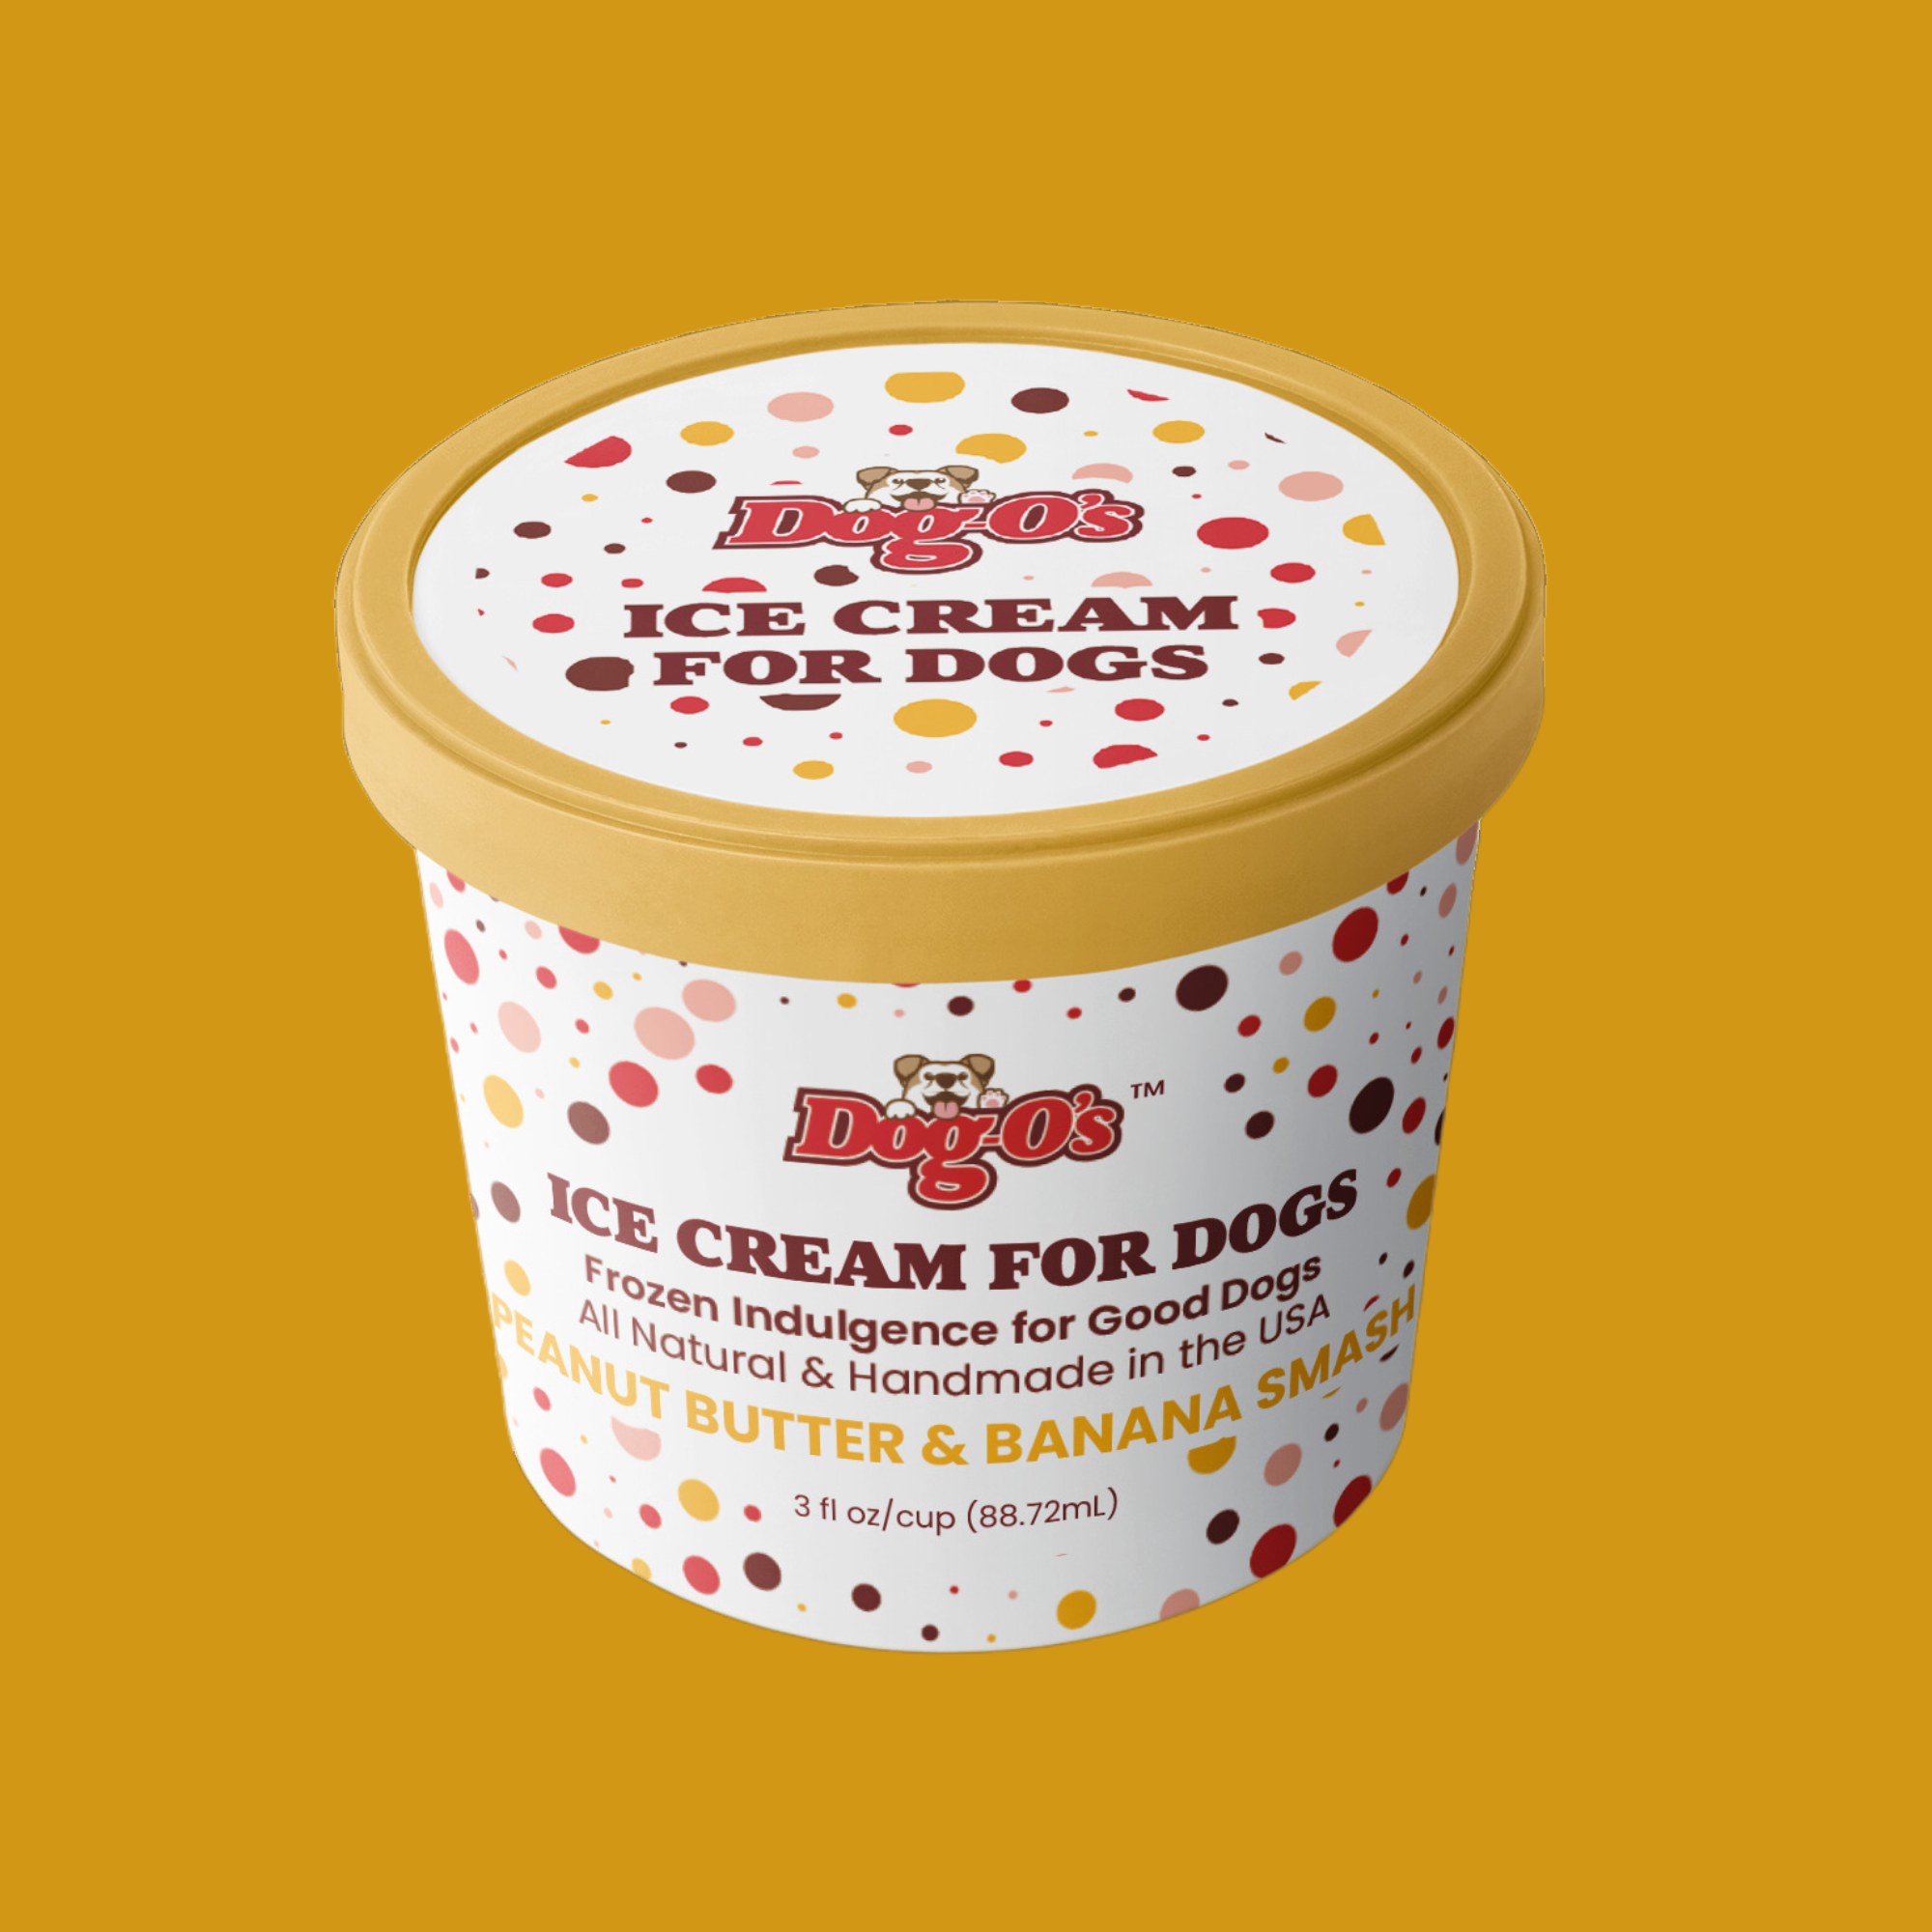 Dog Ice Cream, The Pupper Cup